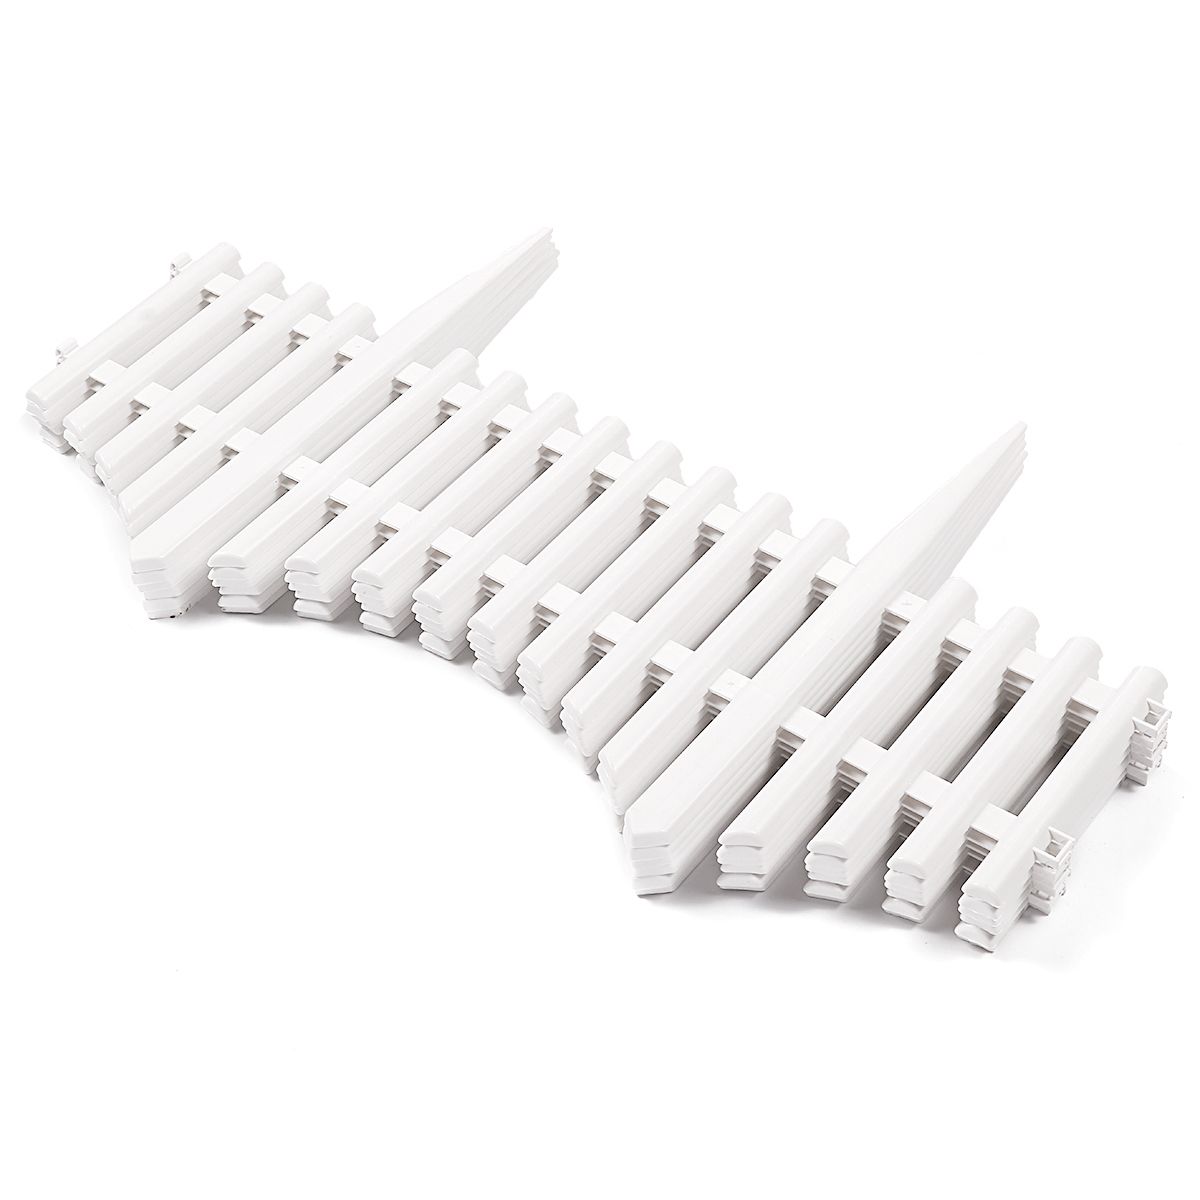 6PCS-PVC--Plastic-White-Fence-Courtyard-Indoor-European-Style-For-Garden-Vegetable-Driveway-1709891